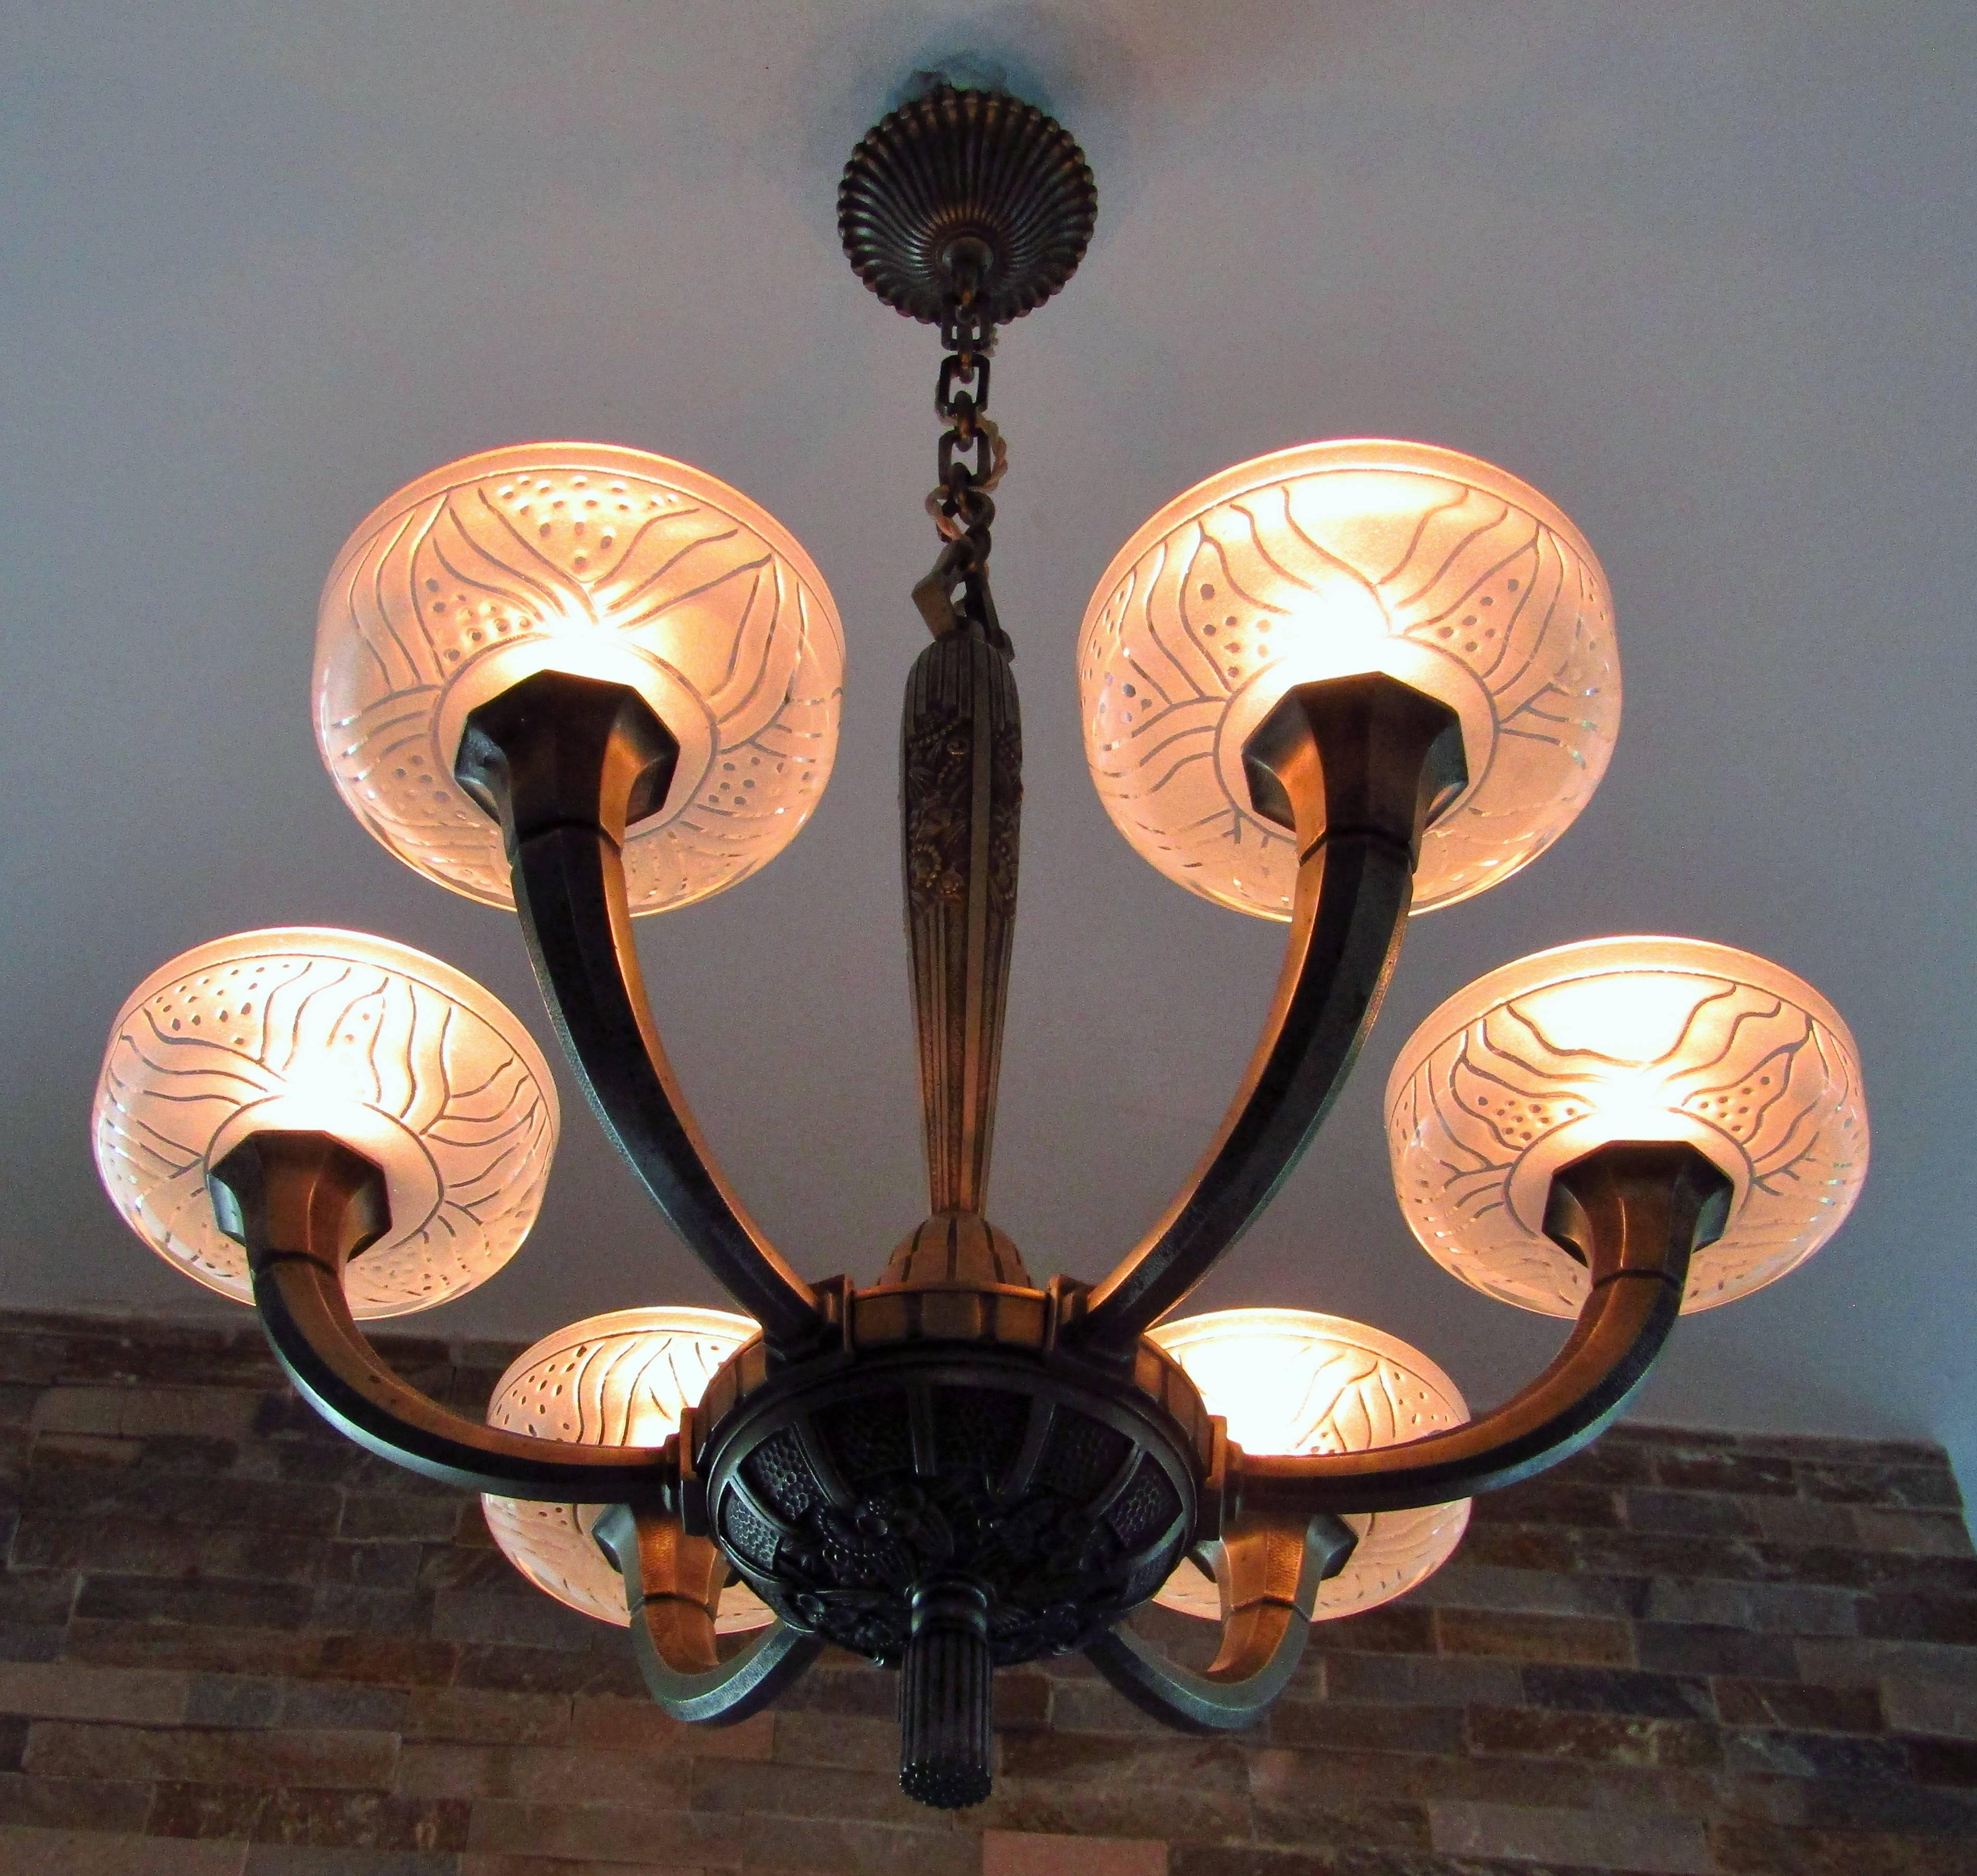 Frosted Art Deco Chandelier by Hettier & Vincent 1925